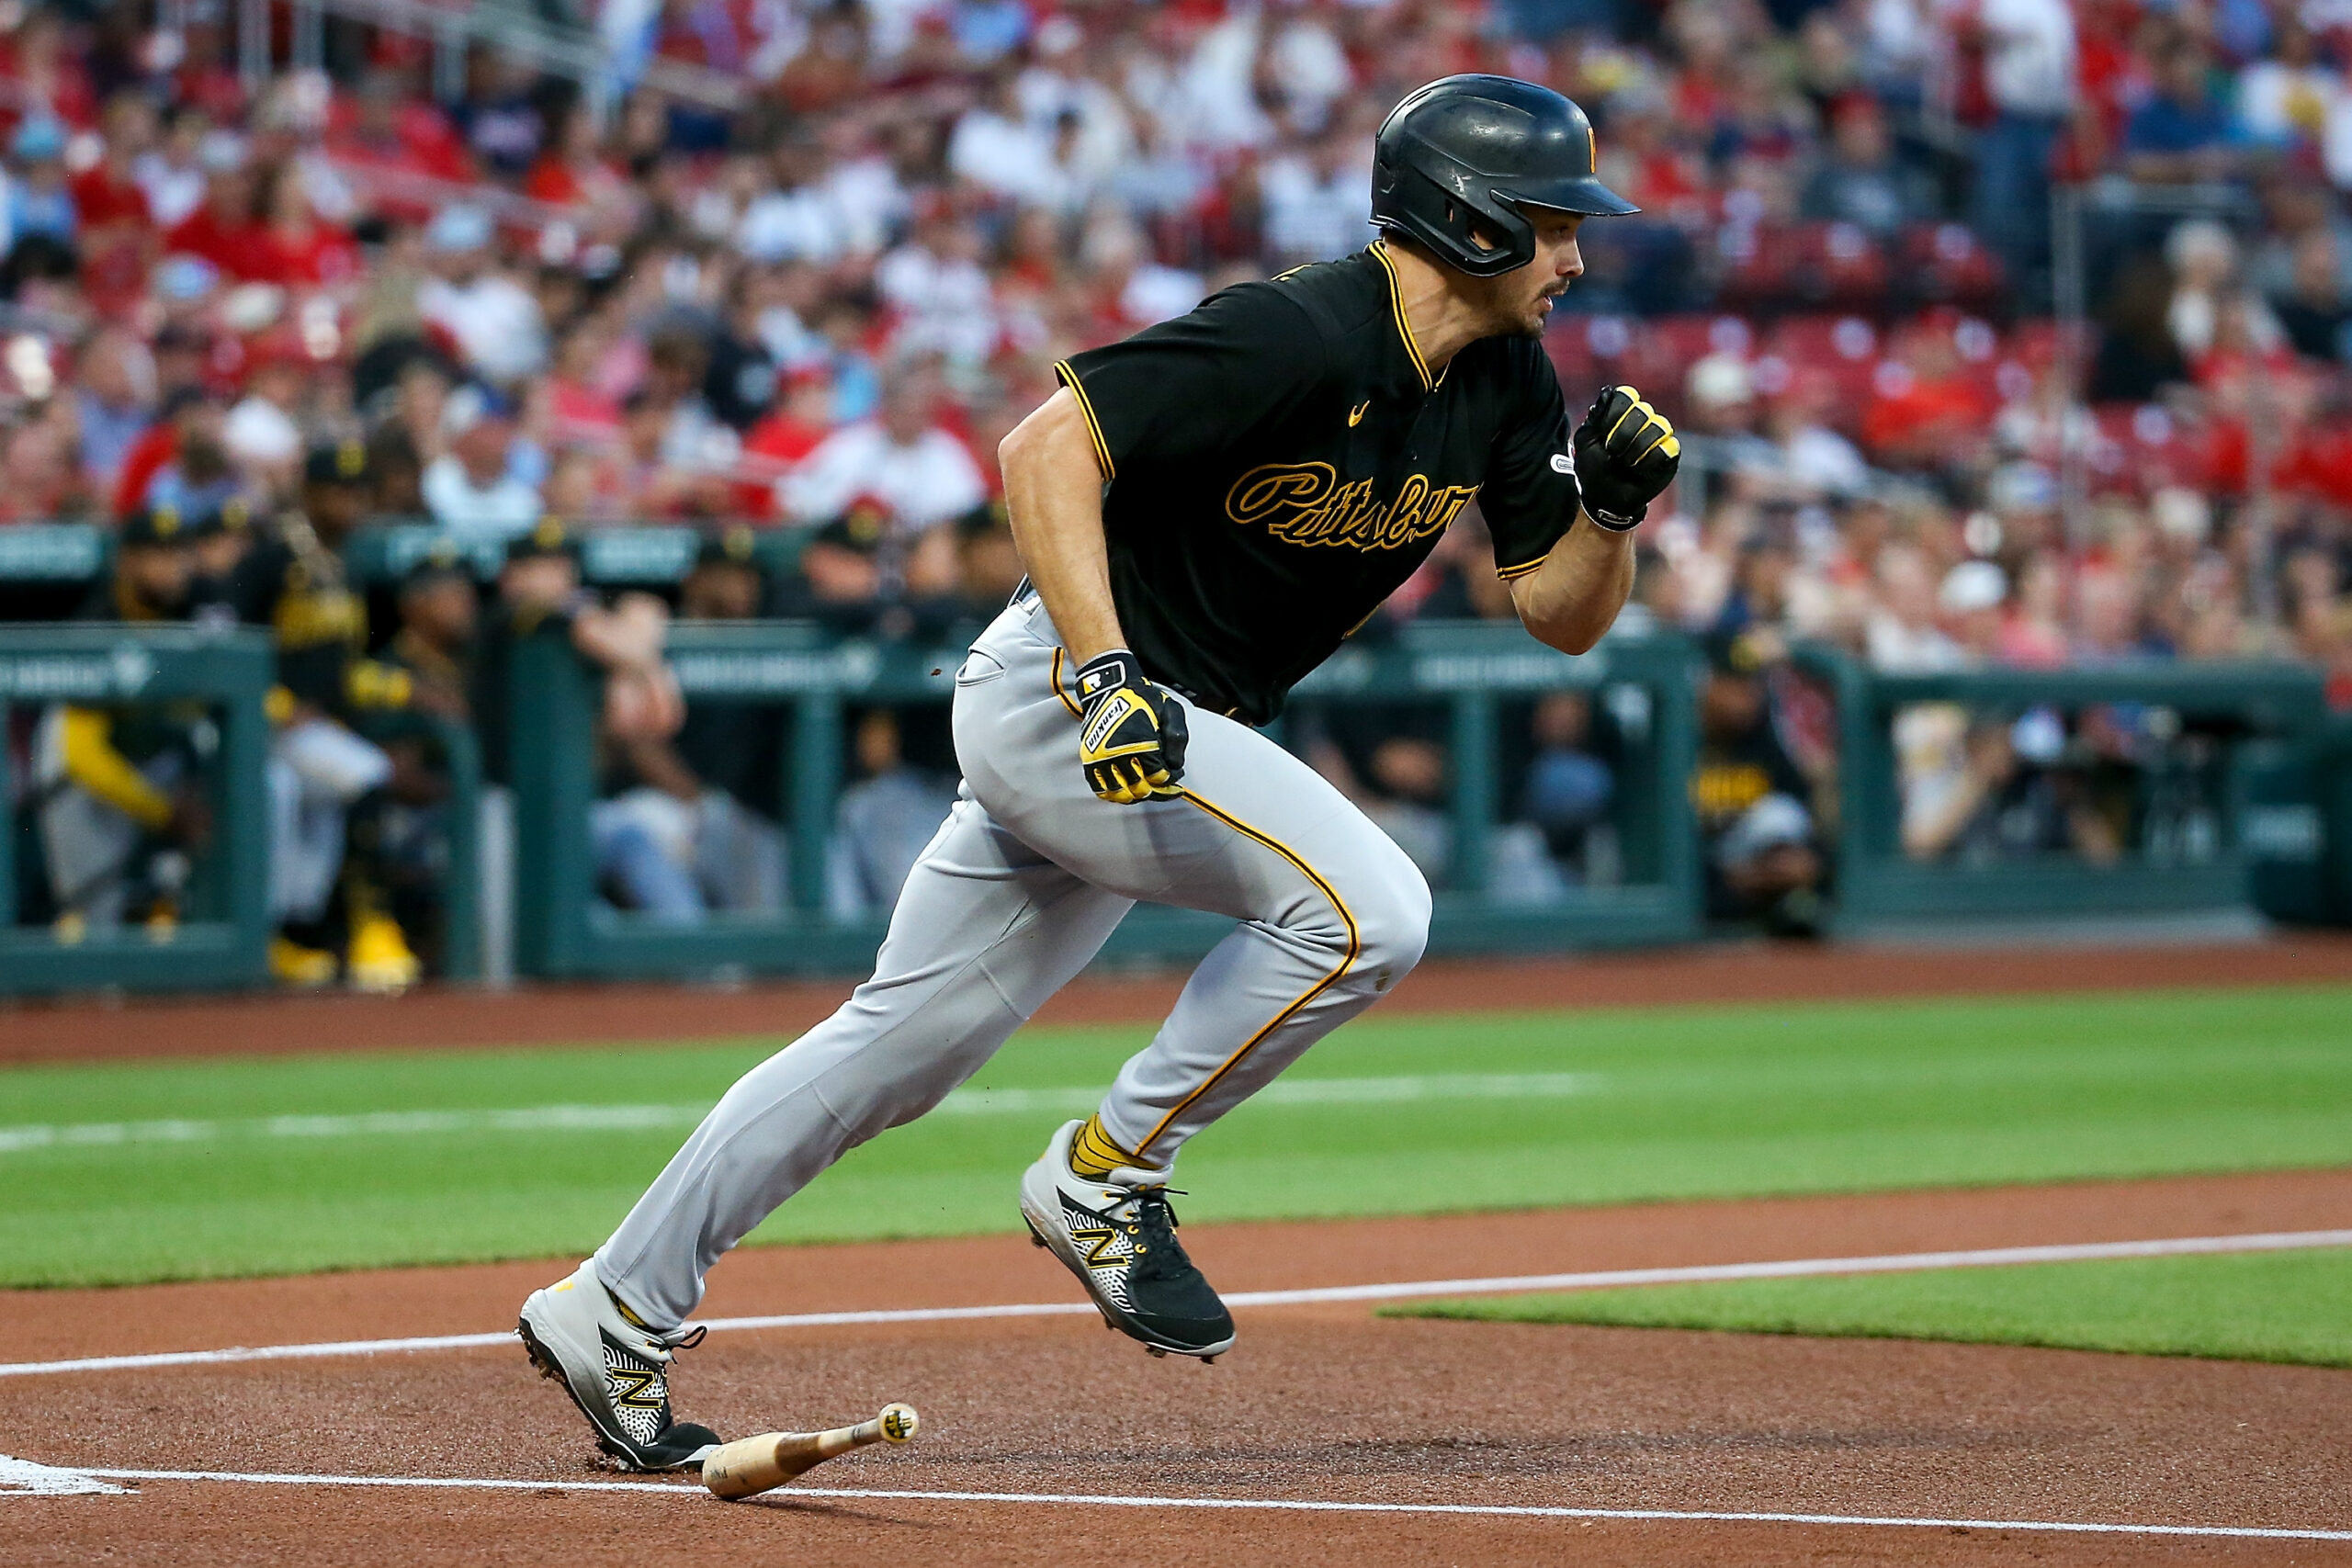 ST. LOUIS, MO - APRIL 14: Bryan Reynolds #10 of the Pittsburgh Pirates runs during the first inning against the St. Louis Cardinals at Busch Stadium on April 14, 2023 in St. Louis, Missouri. (Photo by Scott Kane/Getty Images)